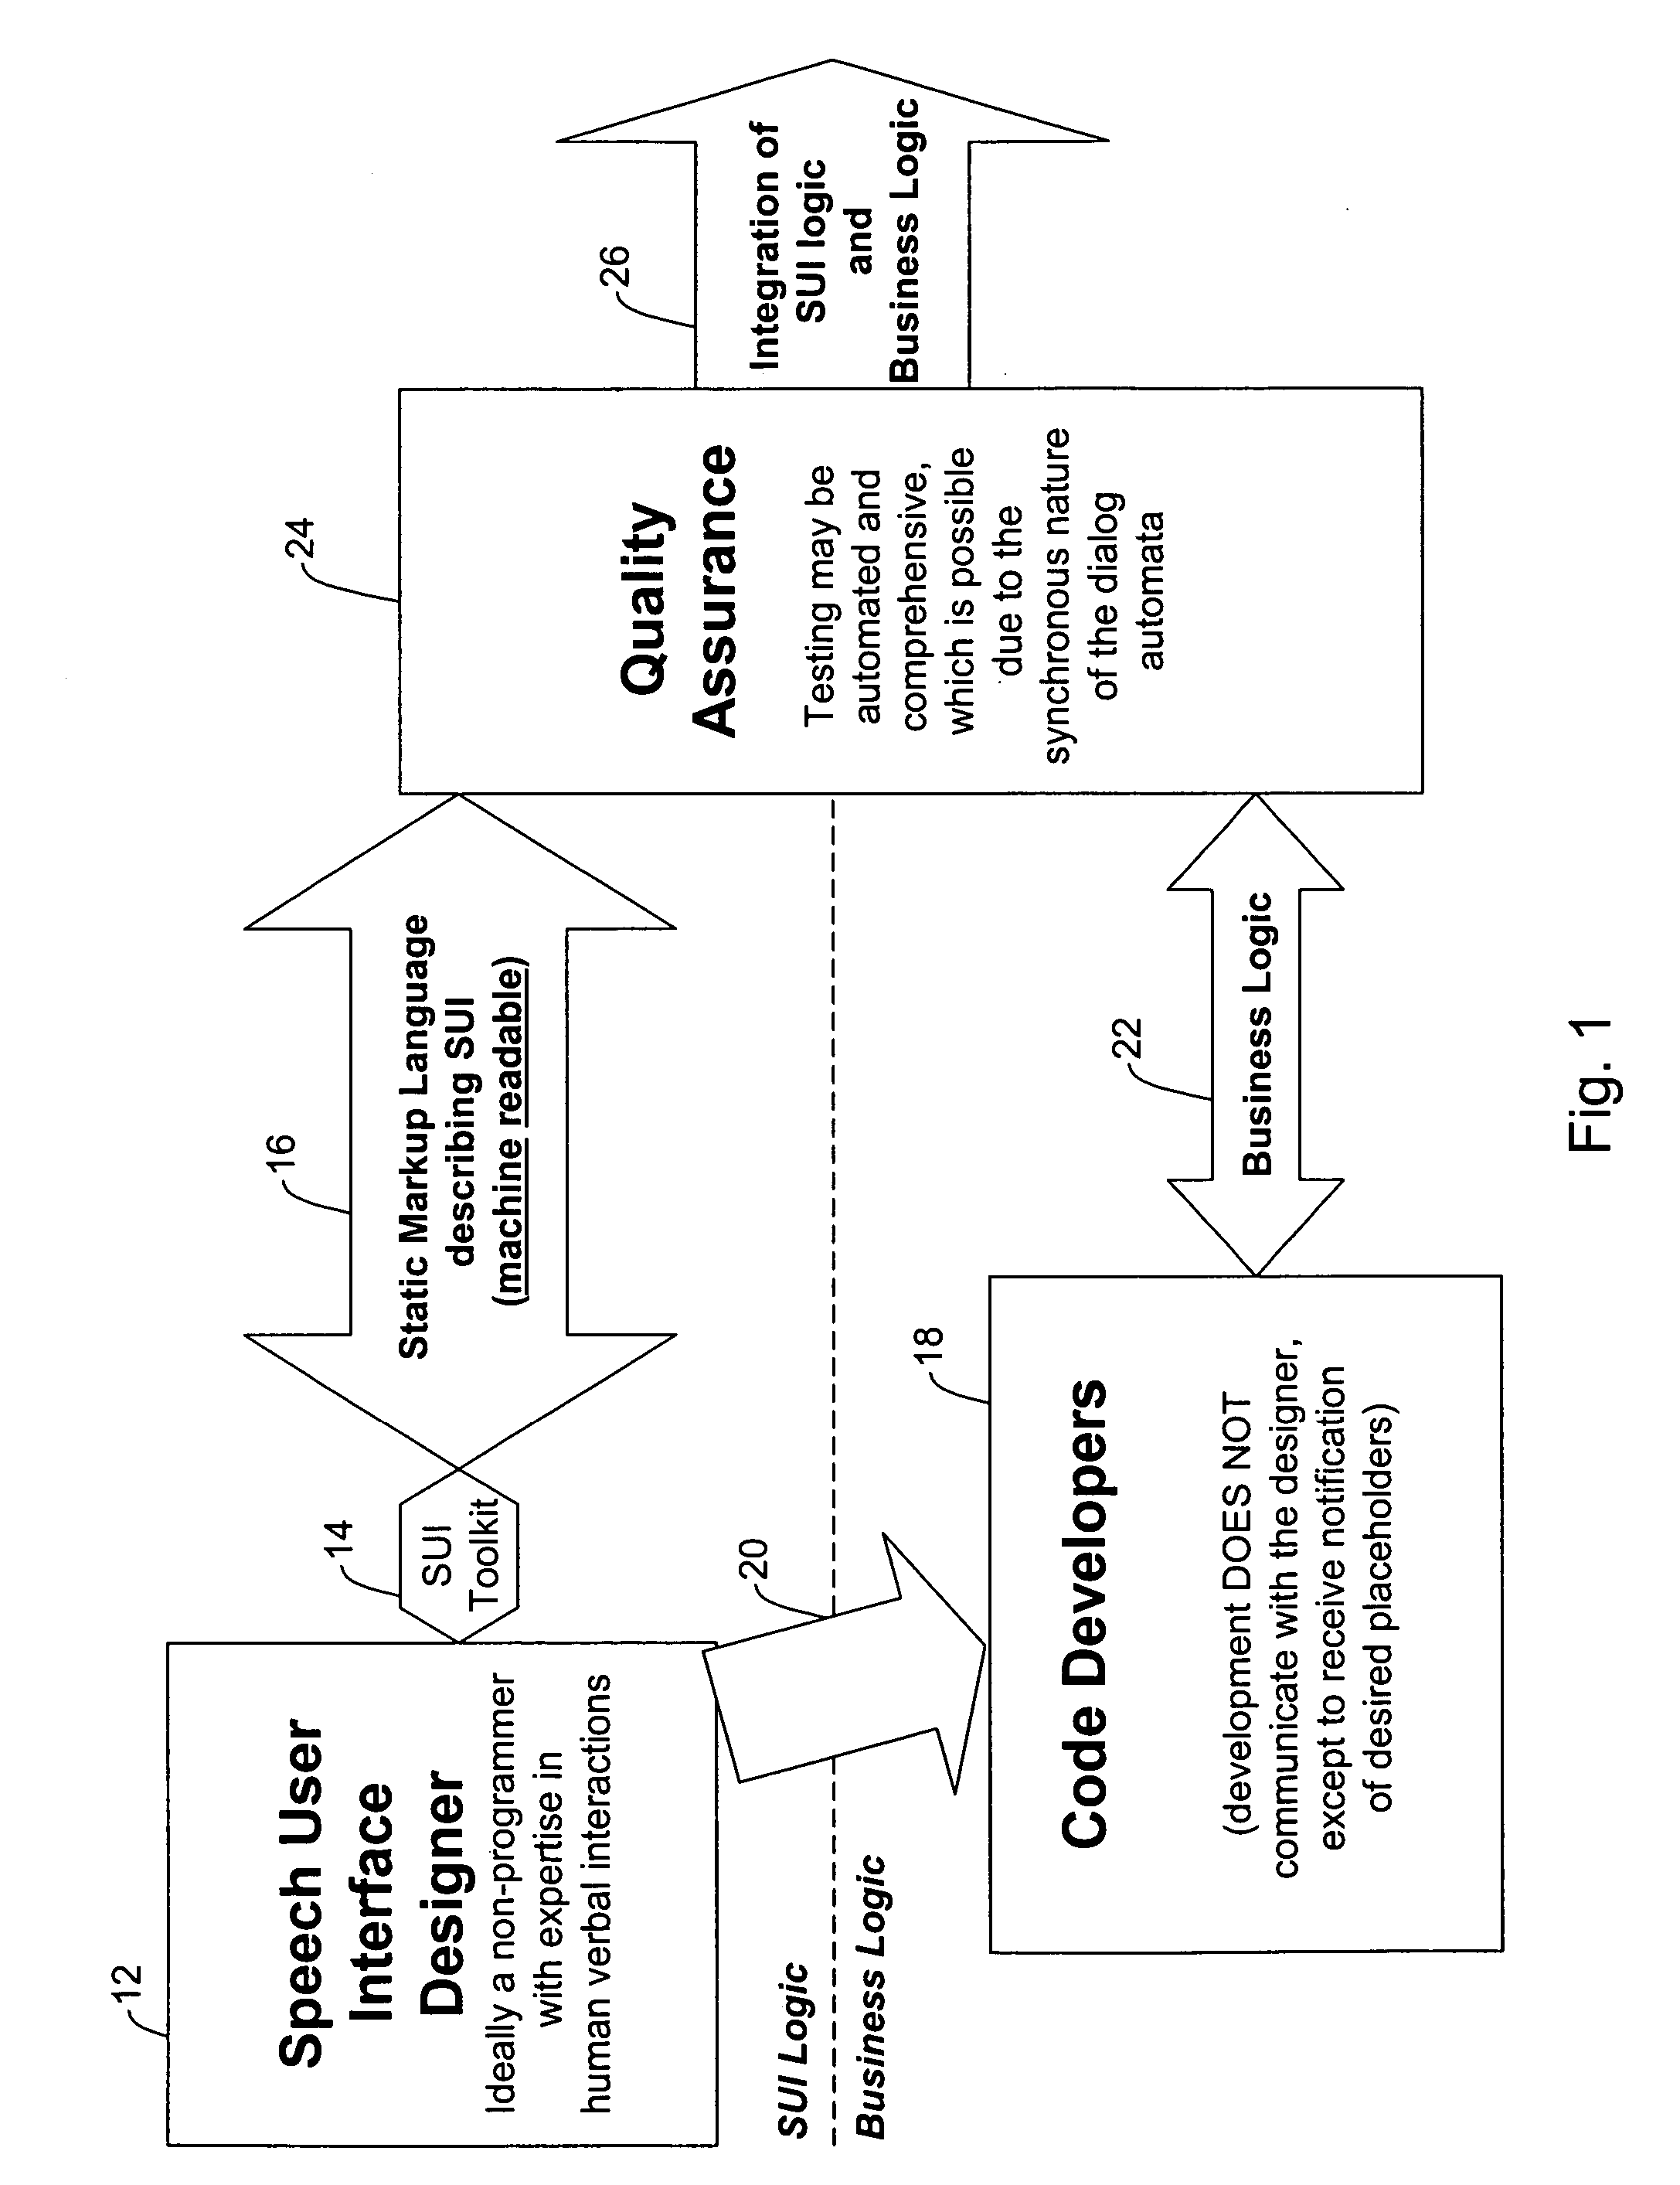 Methods and systems for developing and testing speech applications